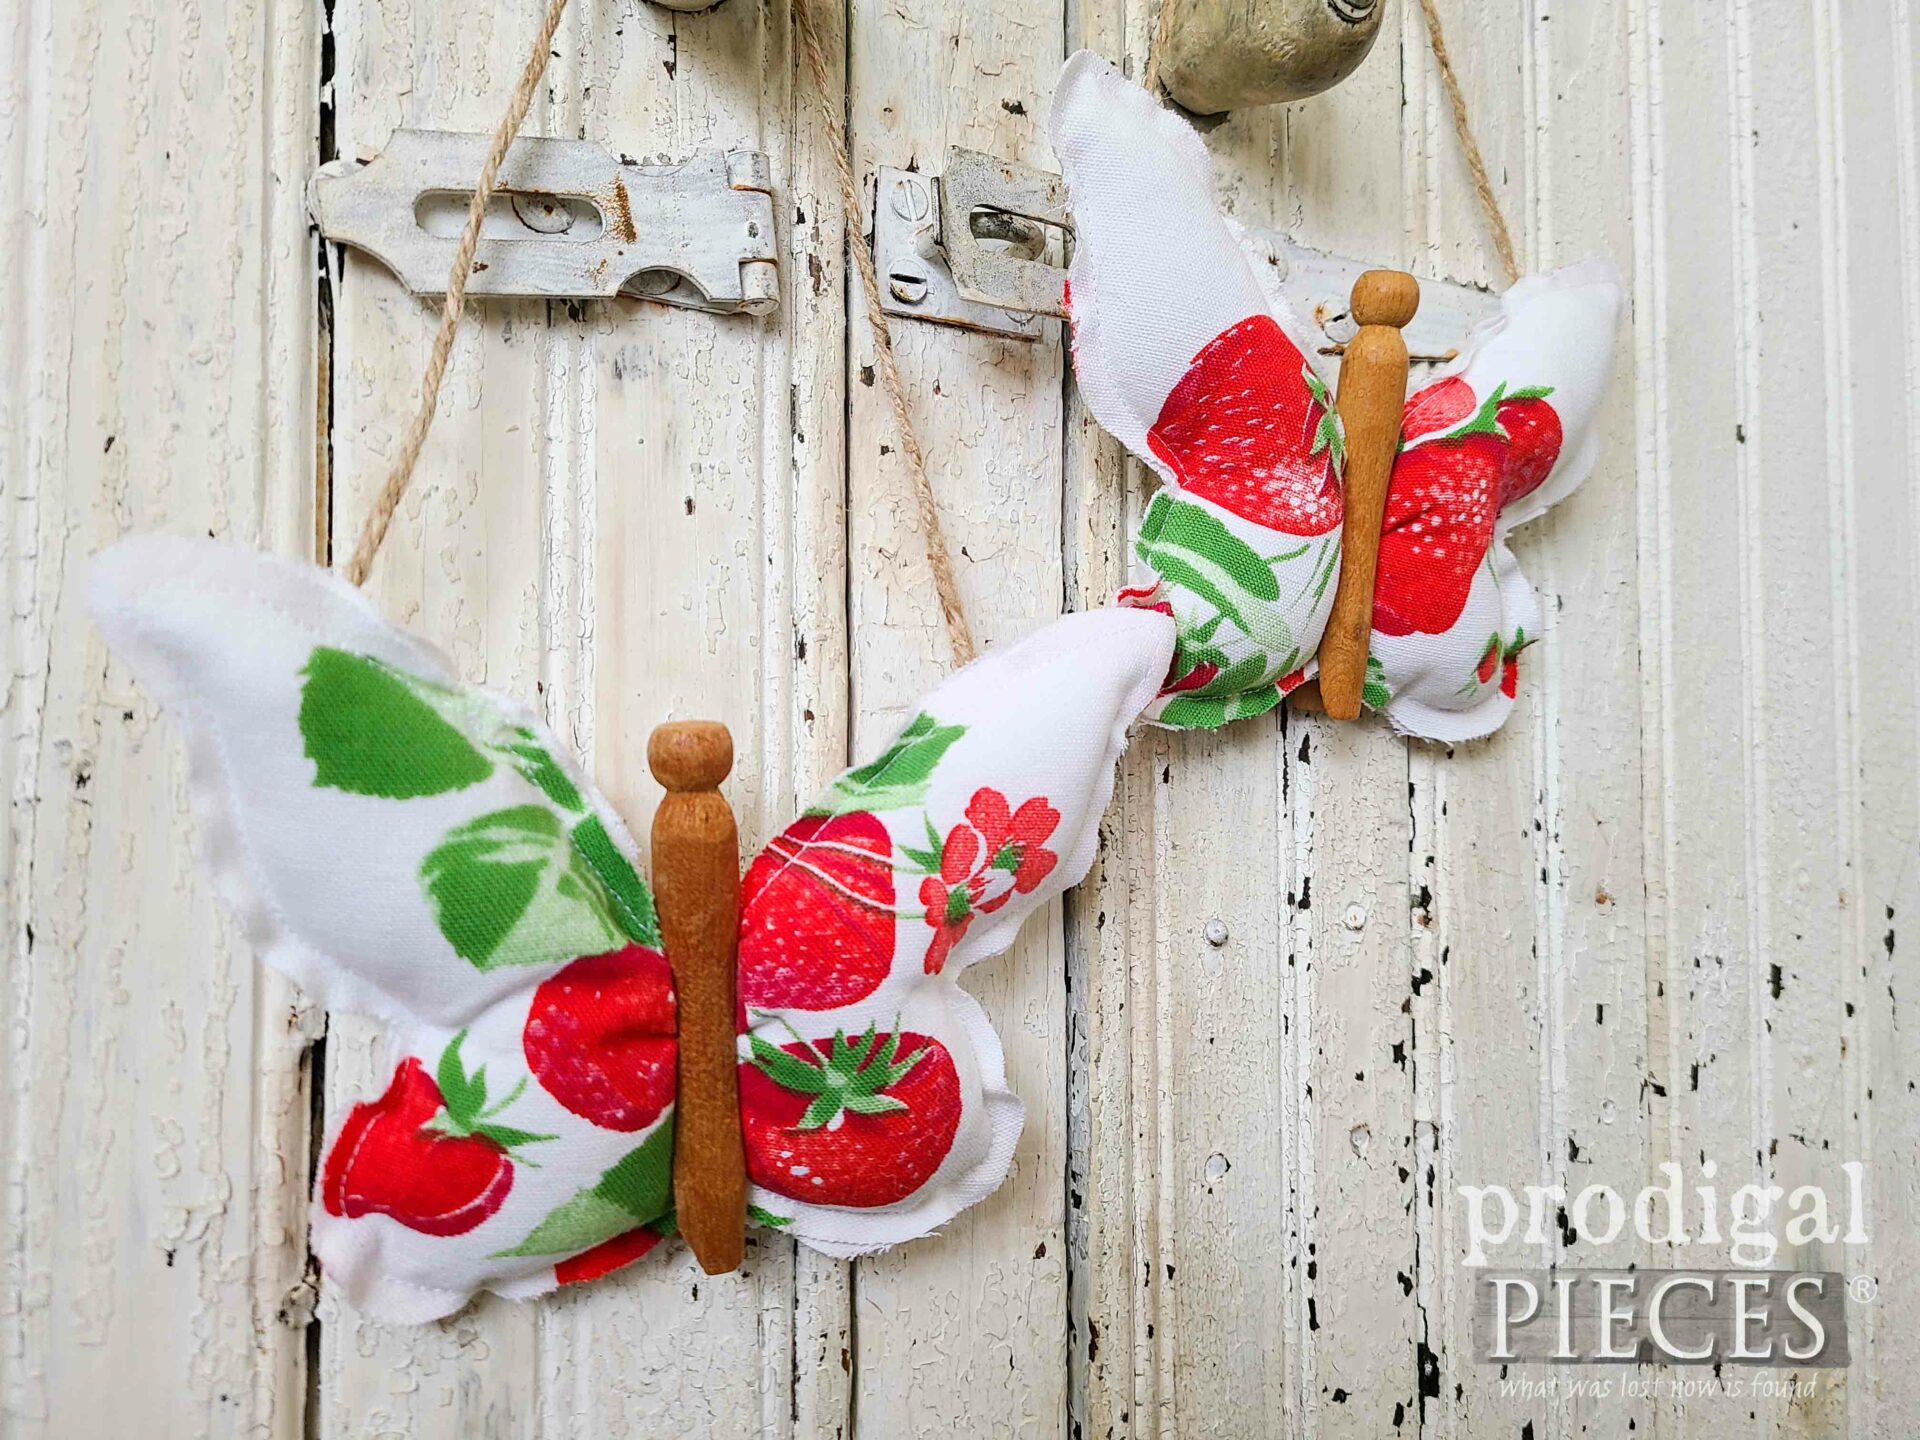 Closeup of Strawberry Butterflies made from Refashioned Tablecloth by Larissa of Prodigal Pieces | prodigalpieces.com #prodigalpieces #refashion #diy #upcycled